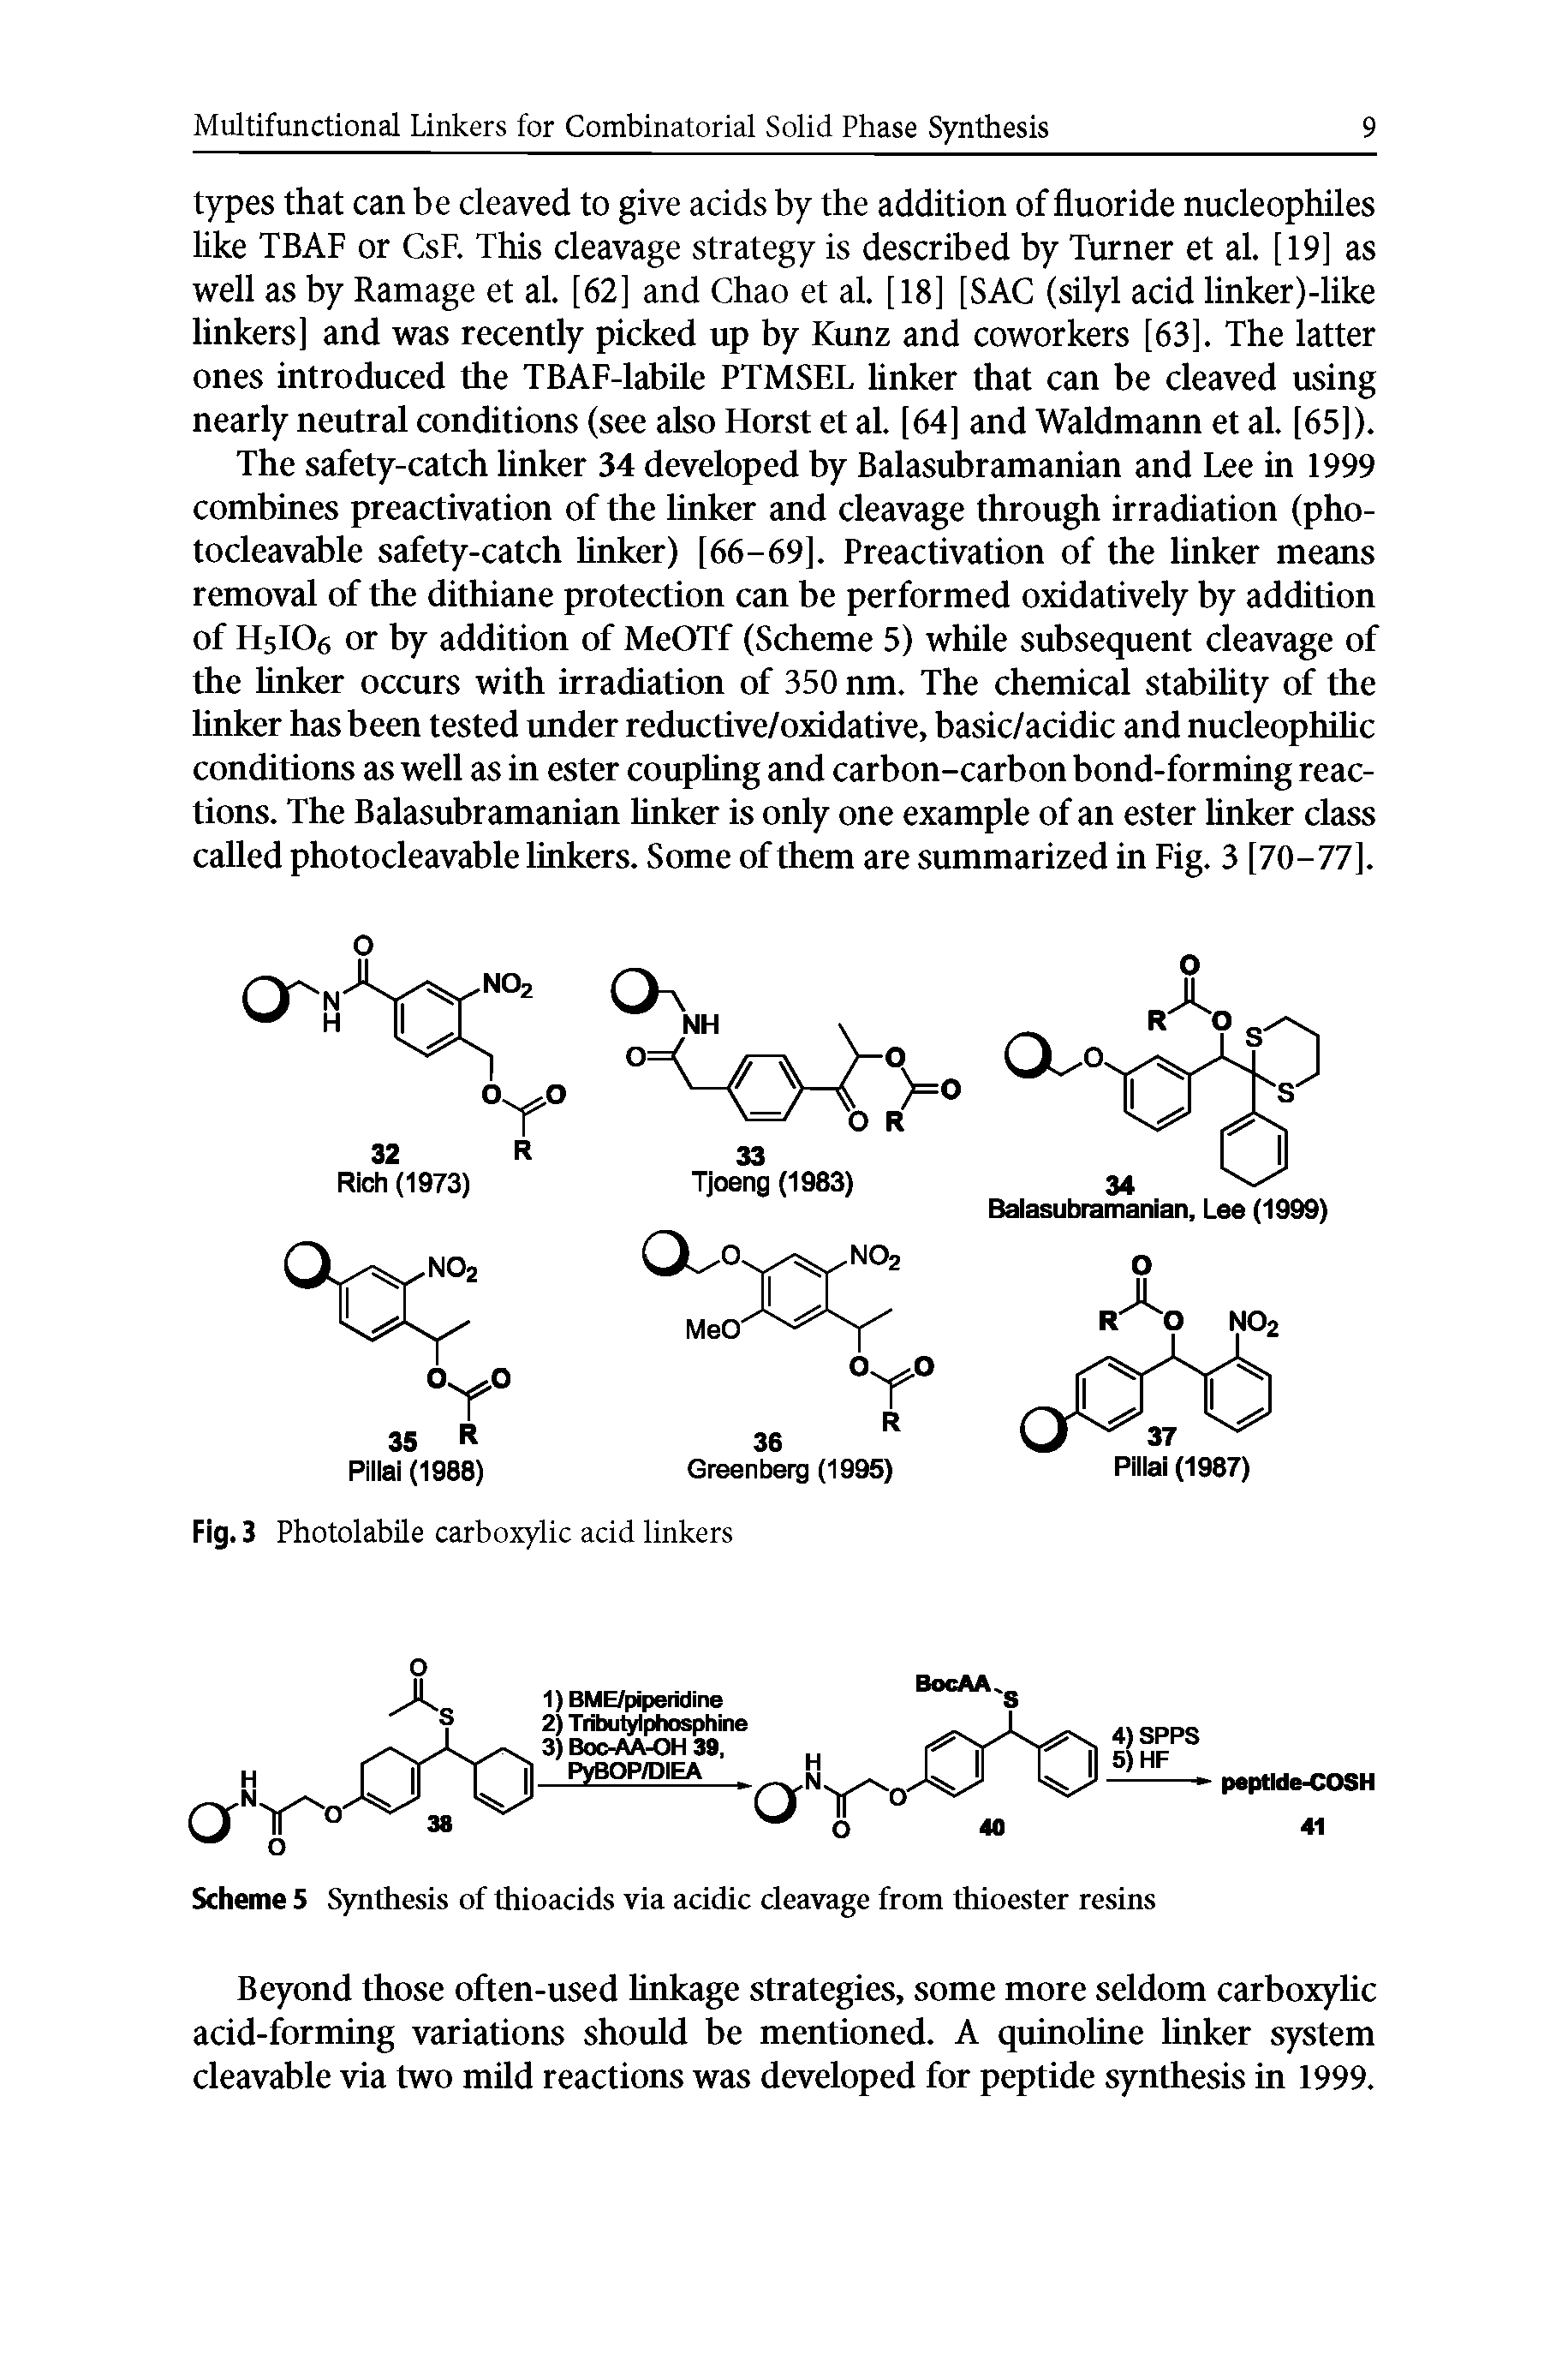 Scheme 5 Synthesis of thioacids via acidic cleavage from thioester resins...